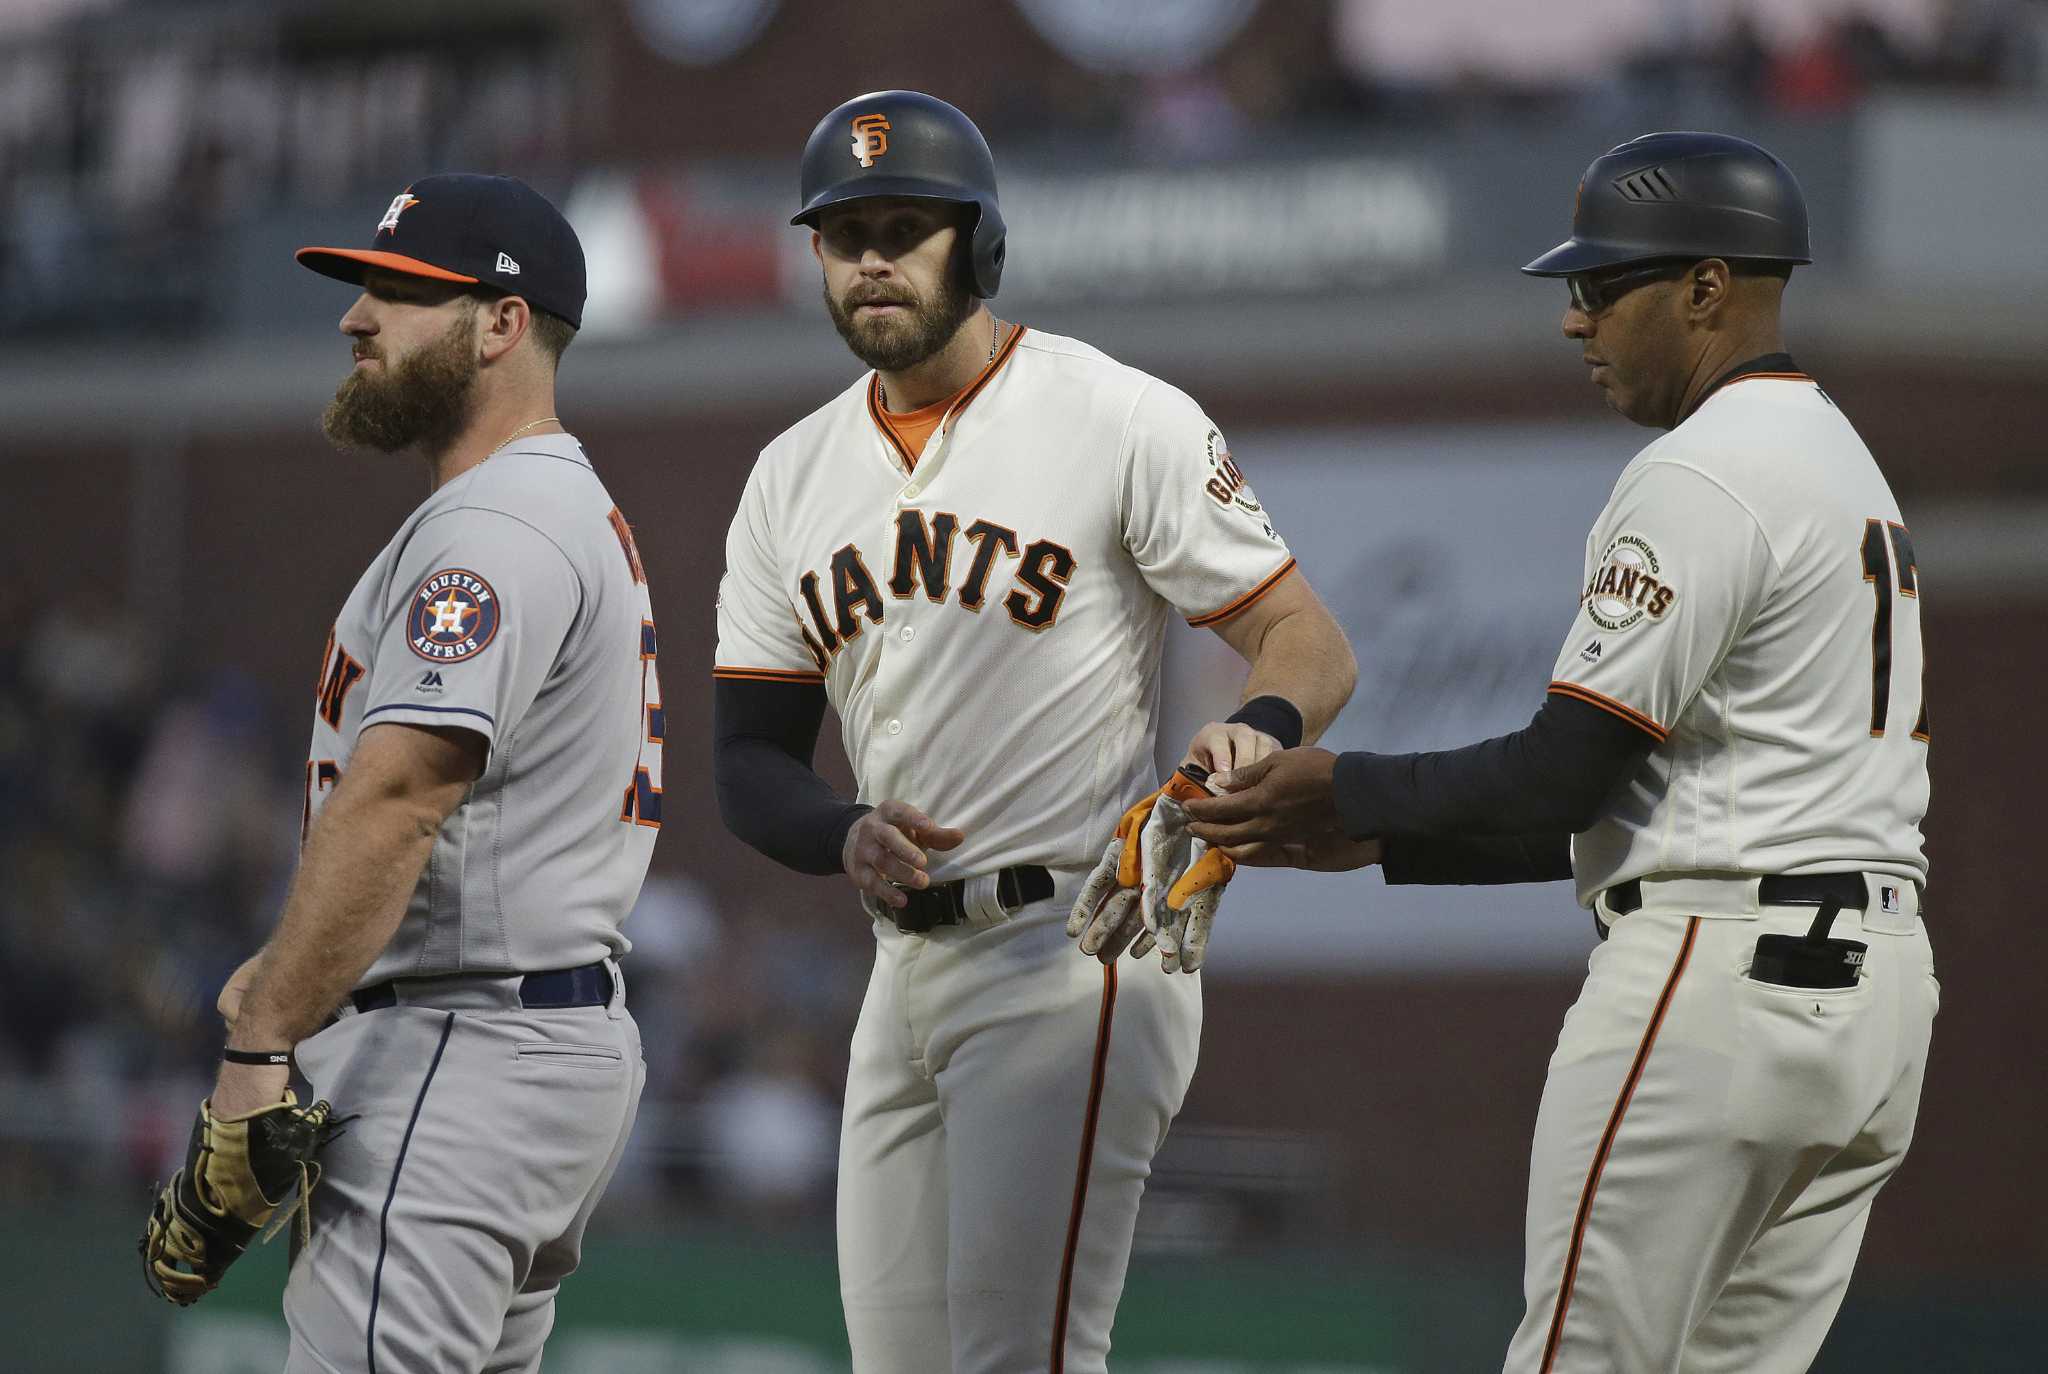 San Francisco Giants' Evan Longoria appears to weigh in on Astros